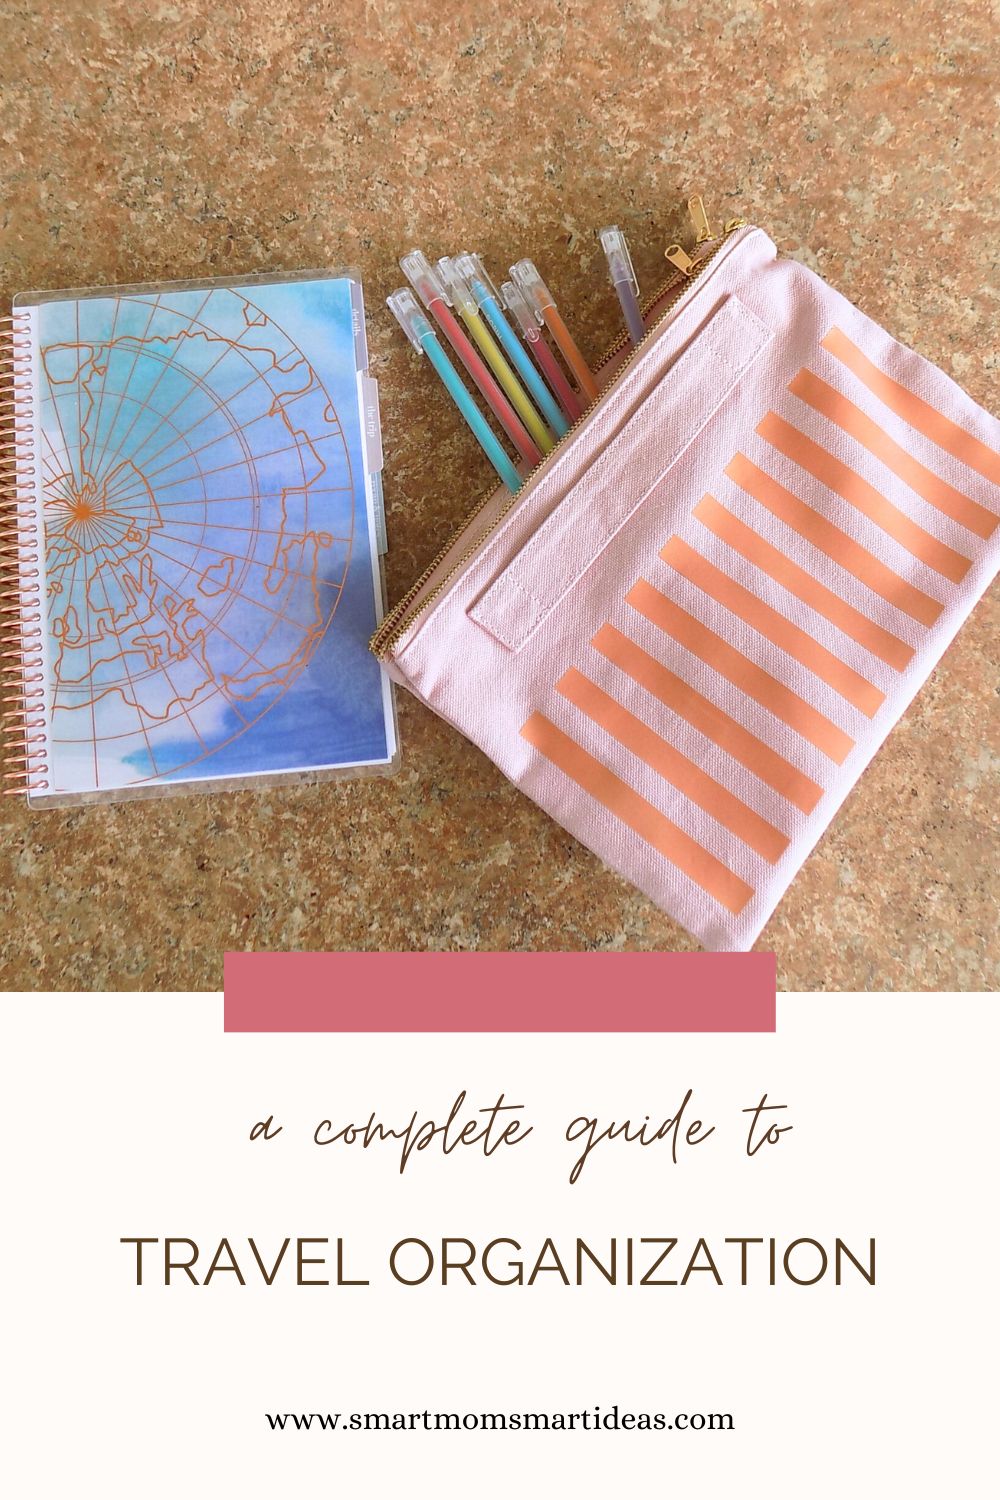 In this post, I'll share travel organization ideas and tips using Erin Condren travel organization bags.